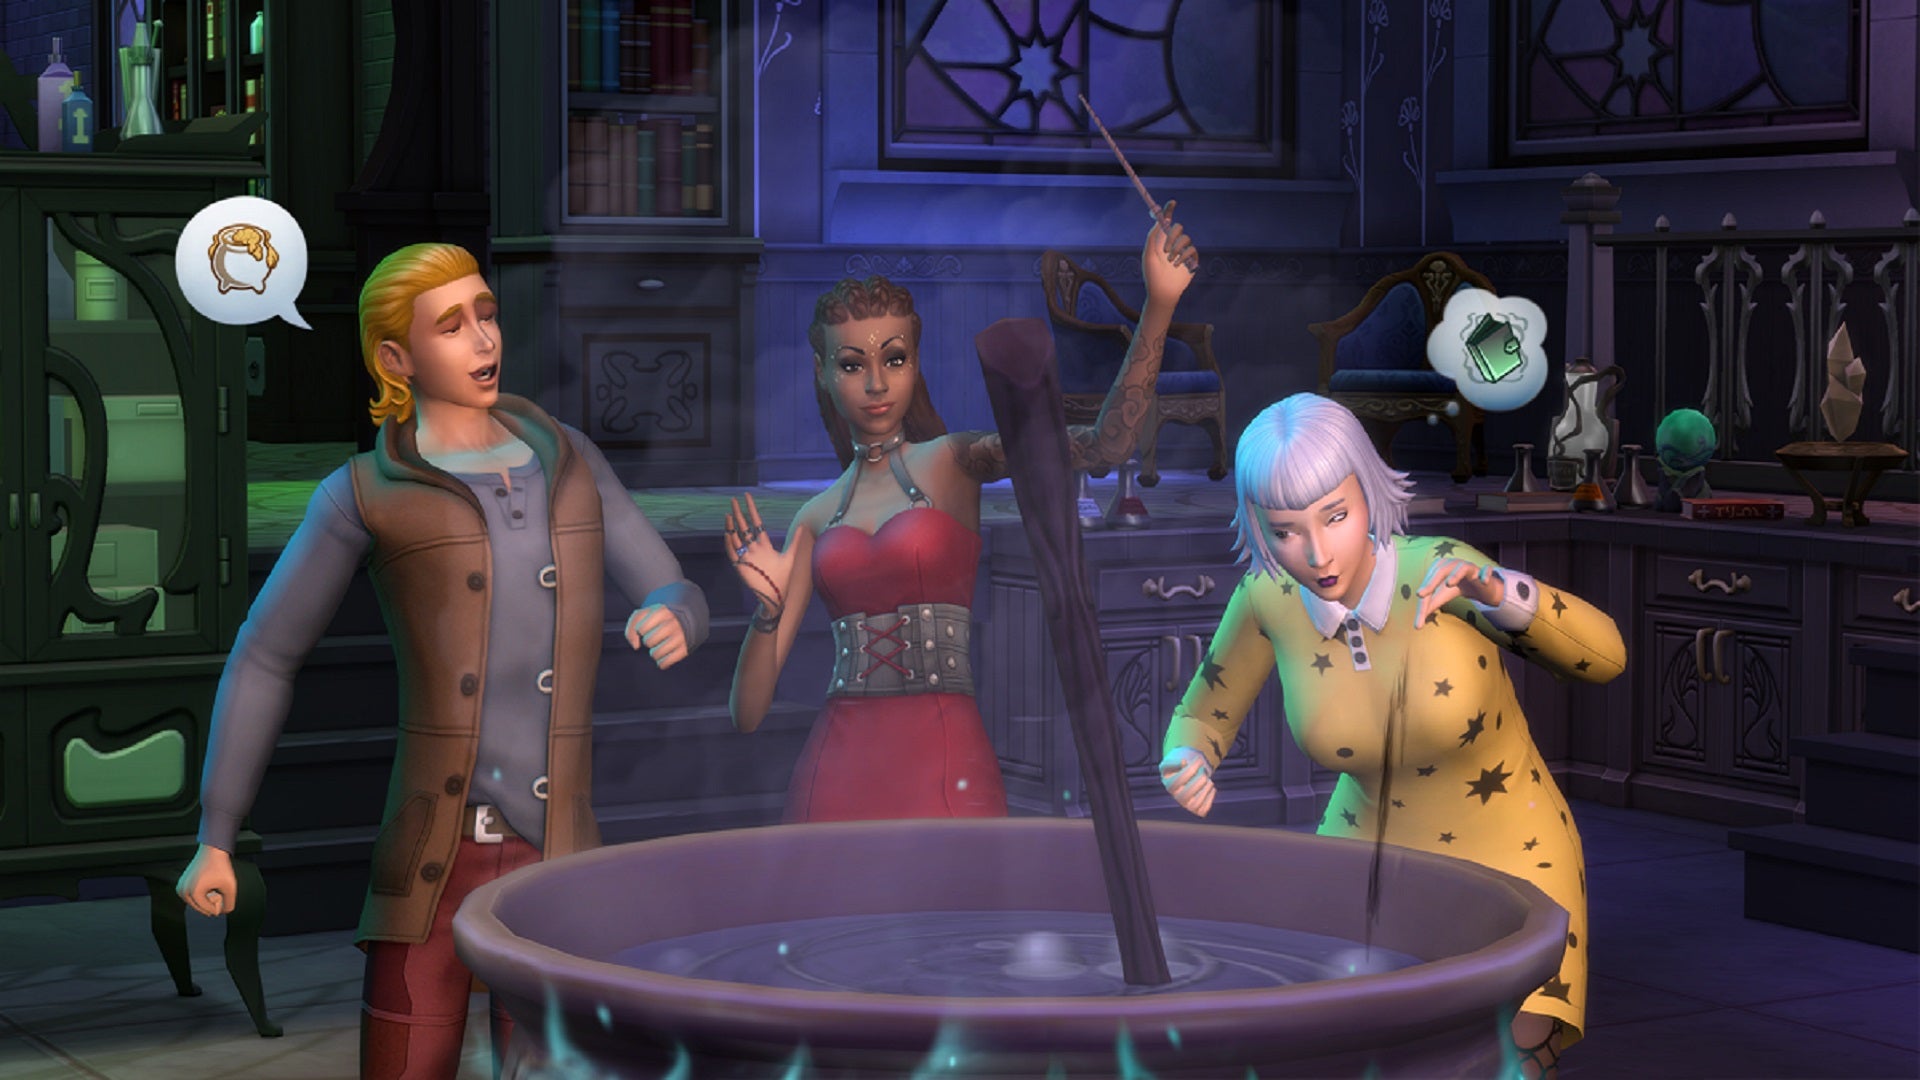 A trio of witches gathered around a cauldron in The Sims 4.